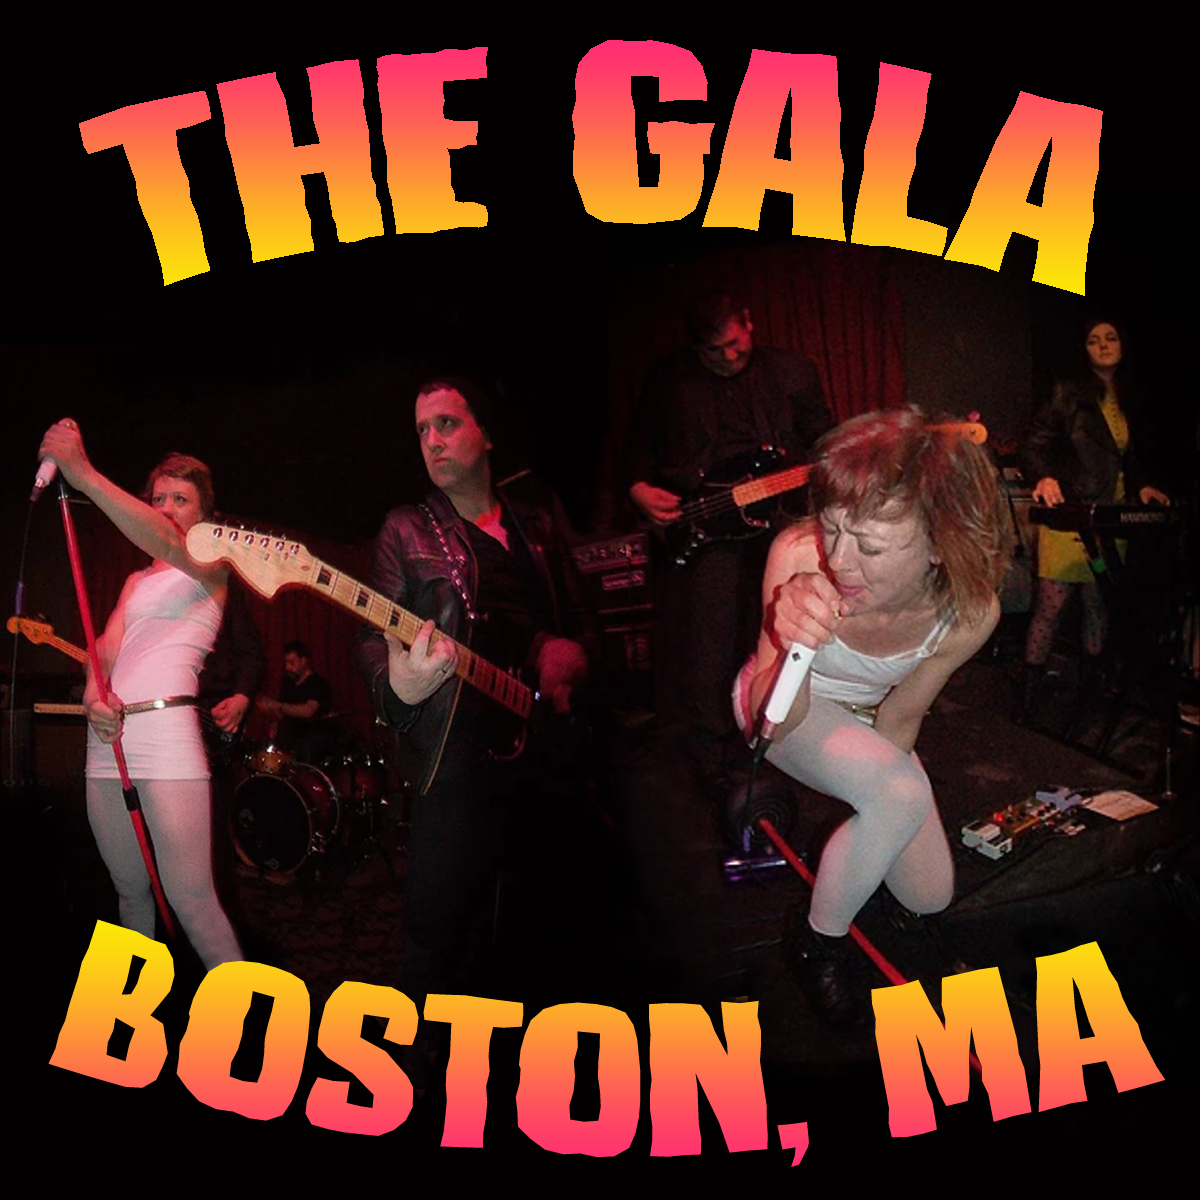 The Gala- Touch Me 7” ~RARE LTD TO 35 NUMBERED COPIES!